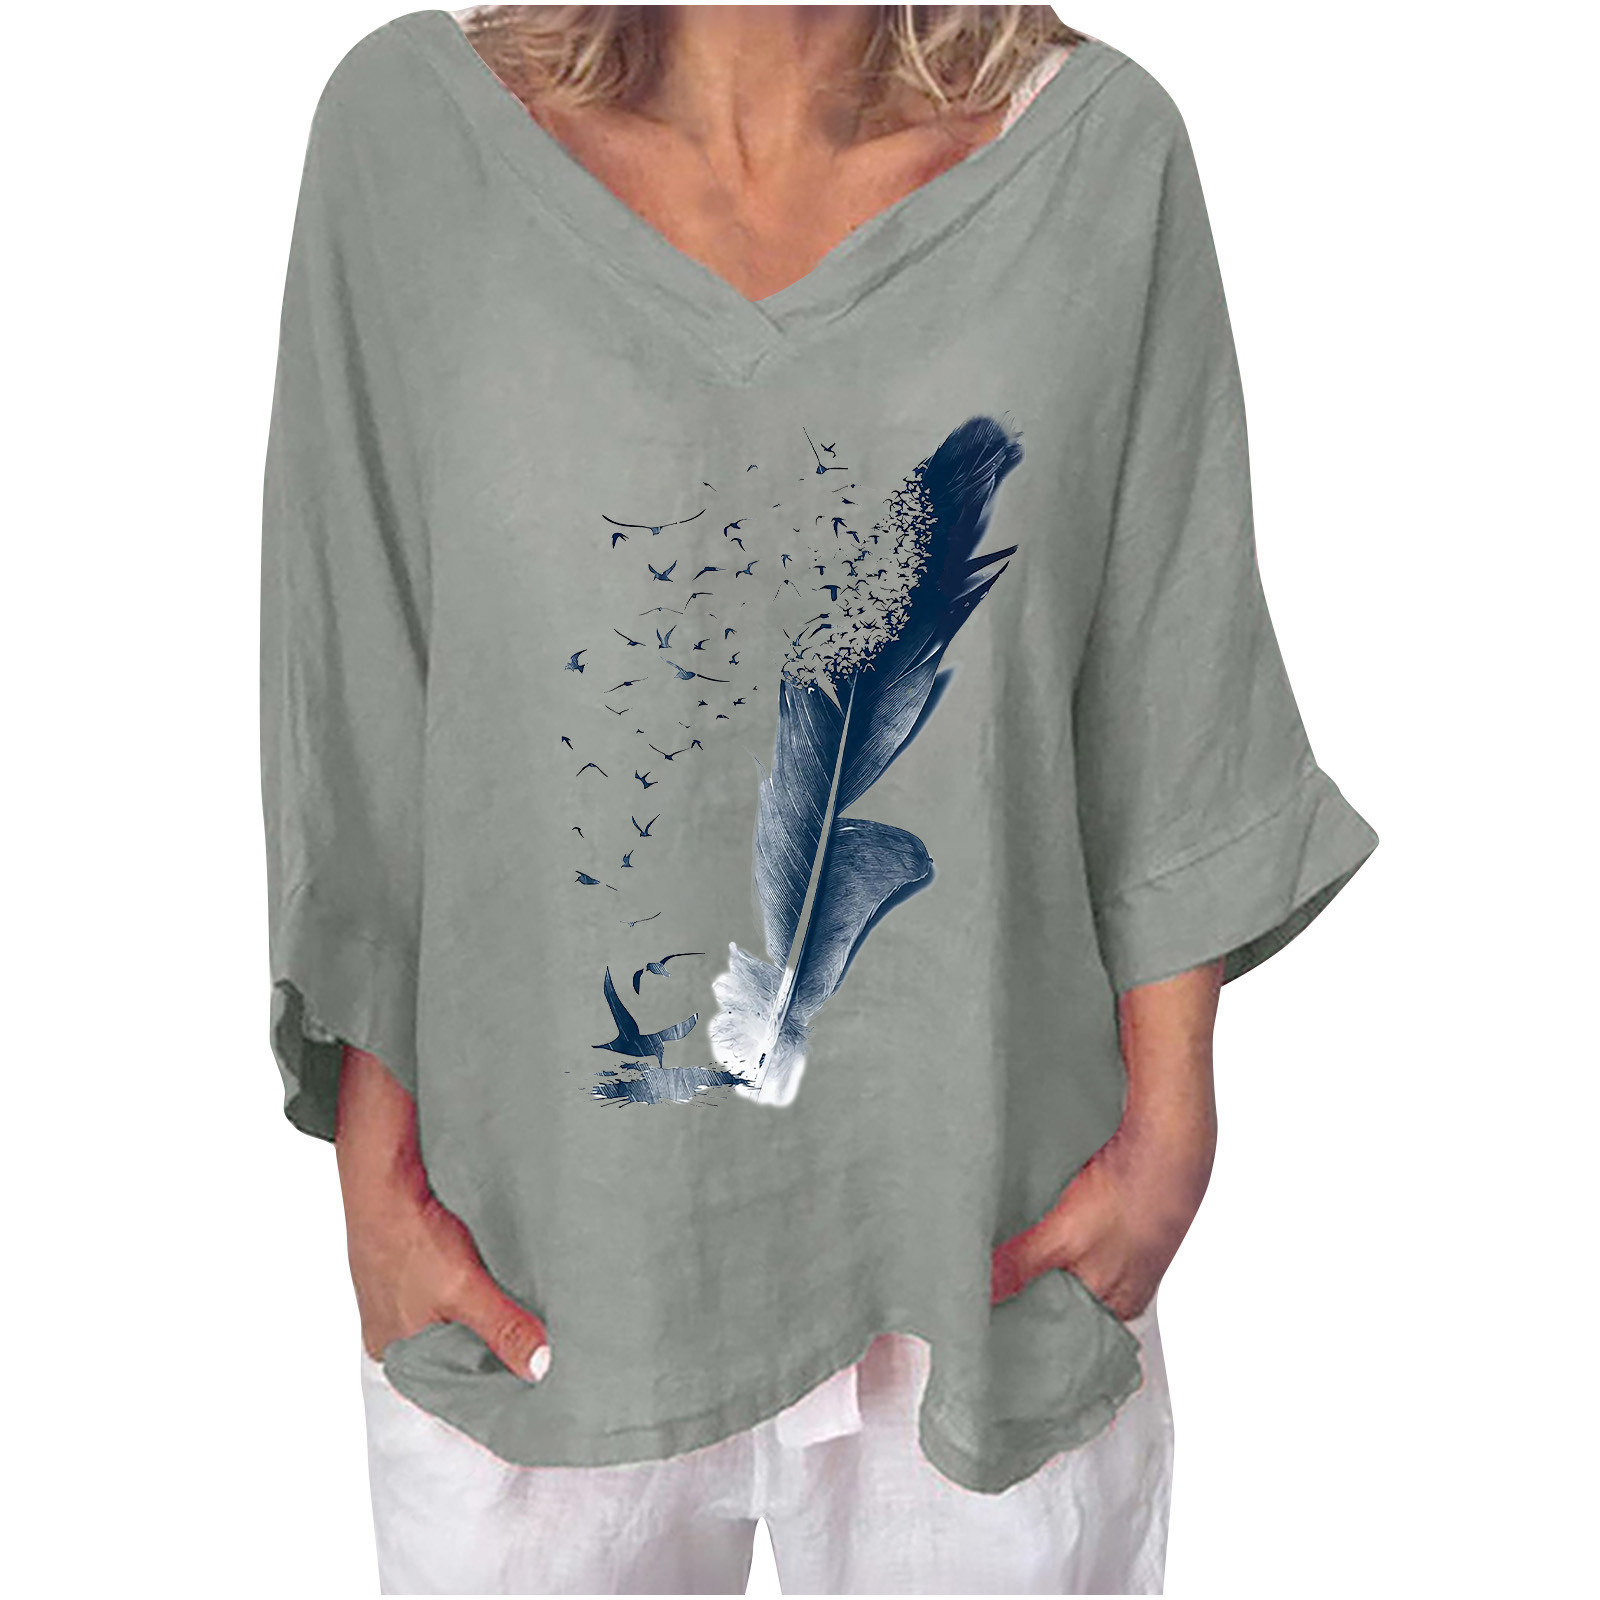 Gamivast Womens Linen Tops and Blouses Hippy Vintage Boho T Shirts ...